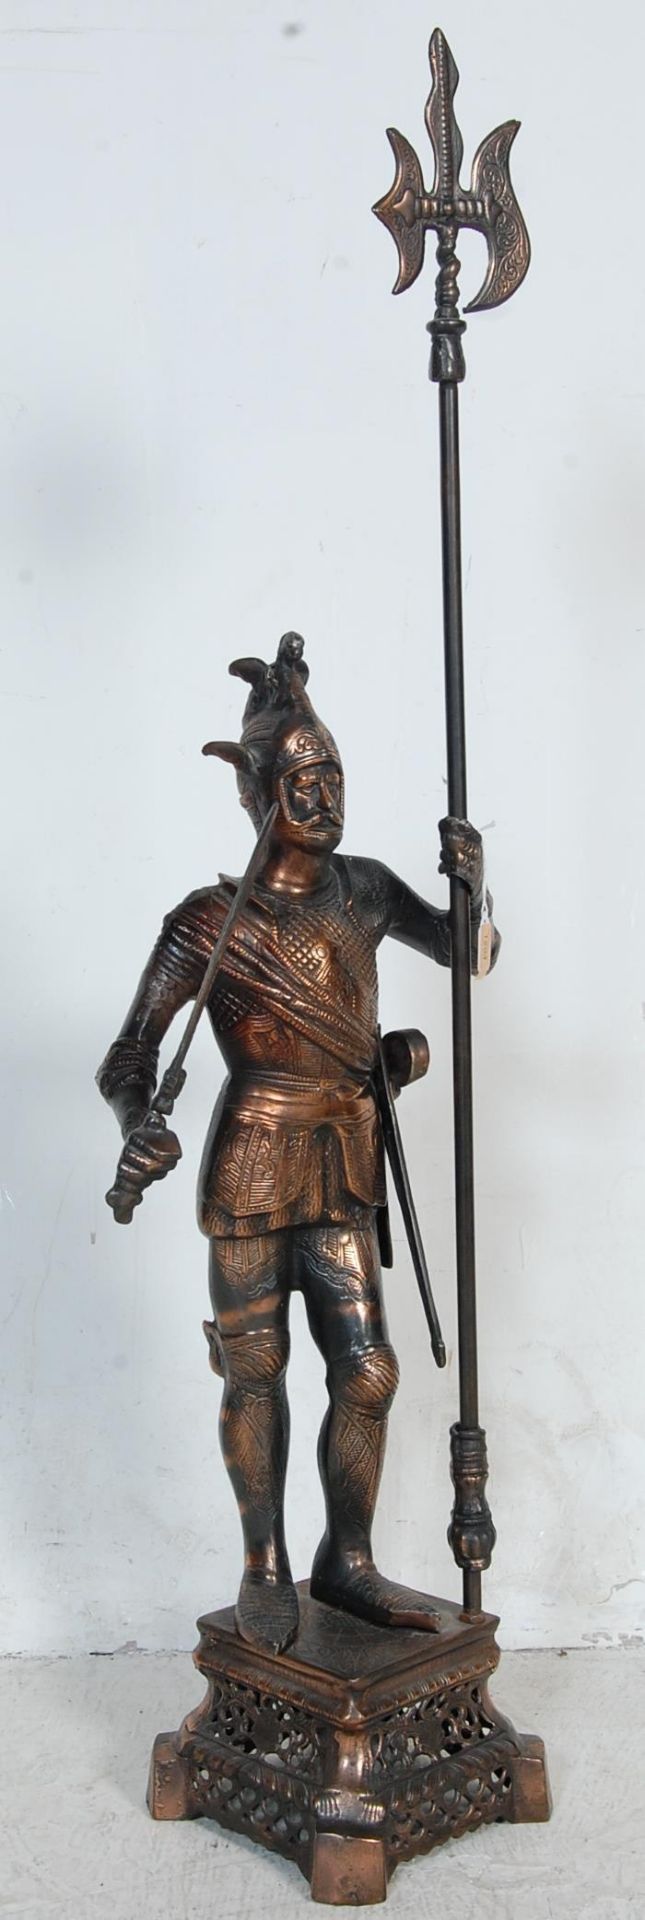 EARLY 20TH CENTURY CAST METAL NORTHERN INDIAN BRONZED STATUE